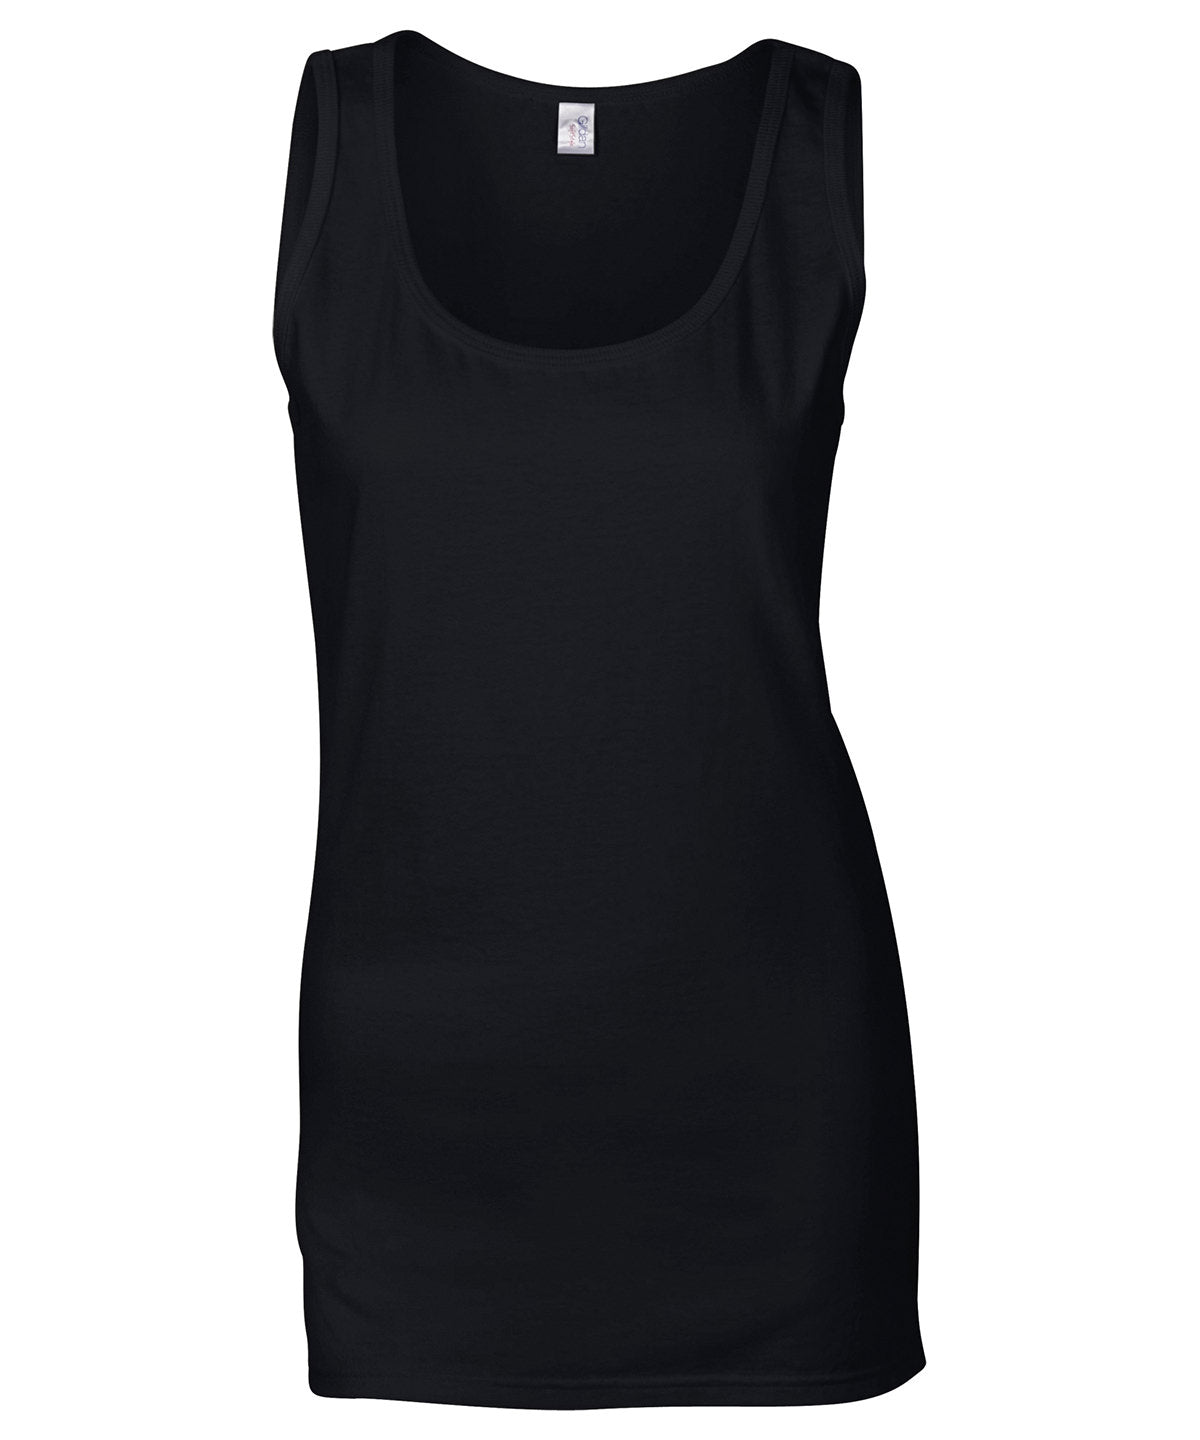 Softstyle women's tank top | Black